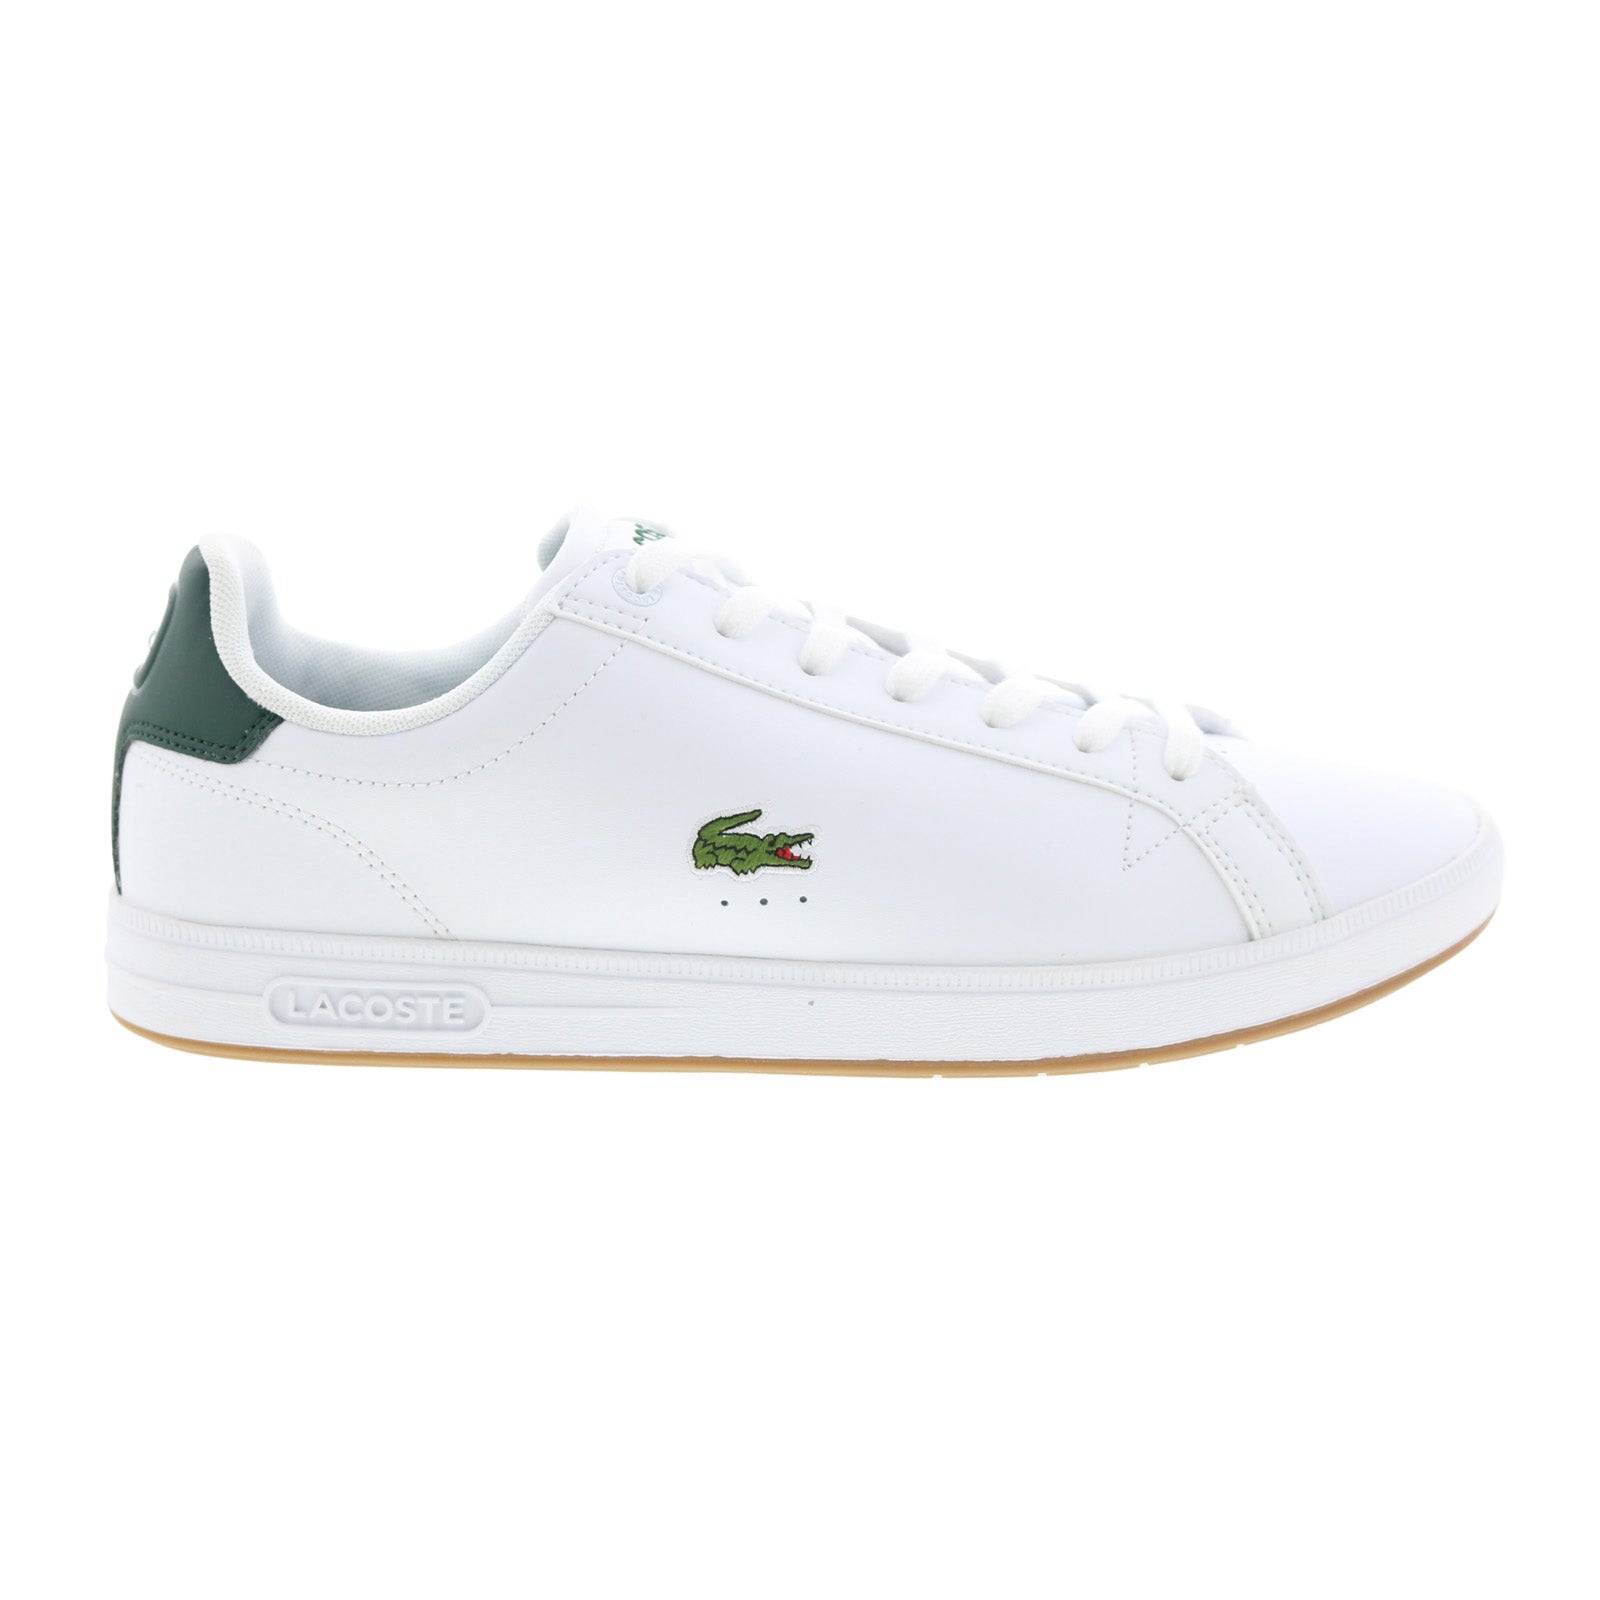 Lacoste Graduate Pro 1 Leather Lifestyle Sneakers Shoes - Ruze